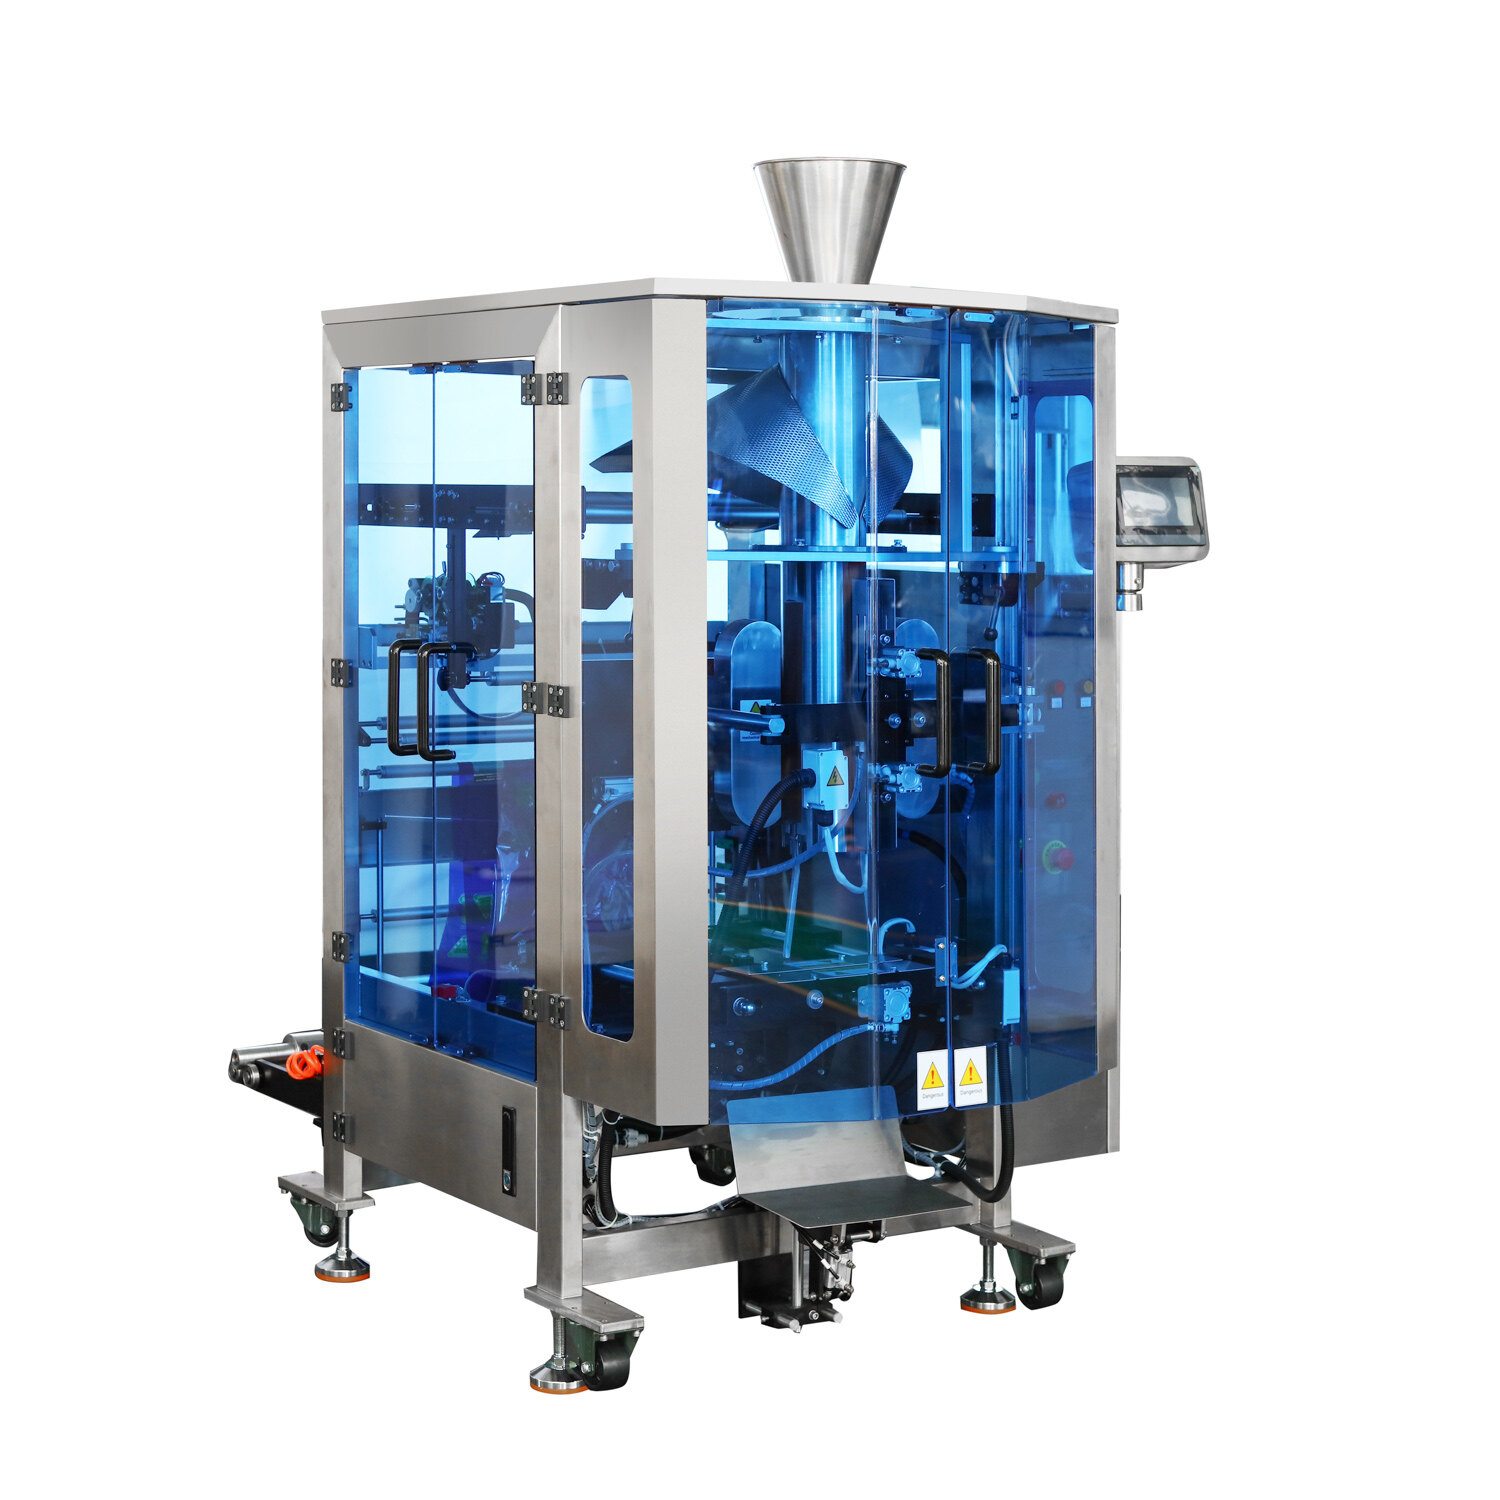 vertical form fill seal packaging machines, vertical packaging machines, vertical bagging machine, vertical bag sealer machine, vertical bag sealing machine